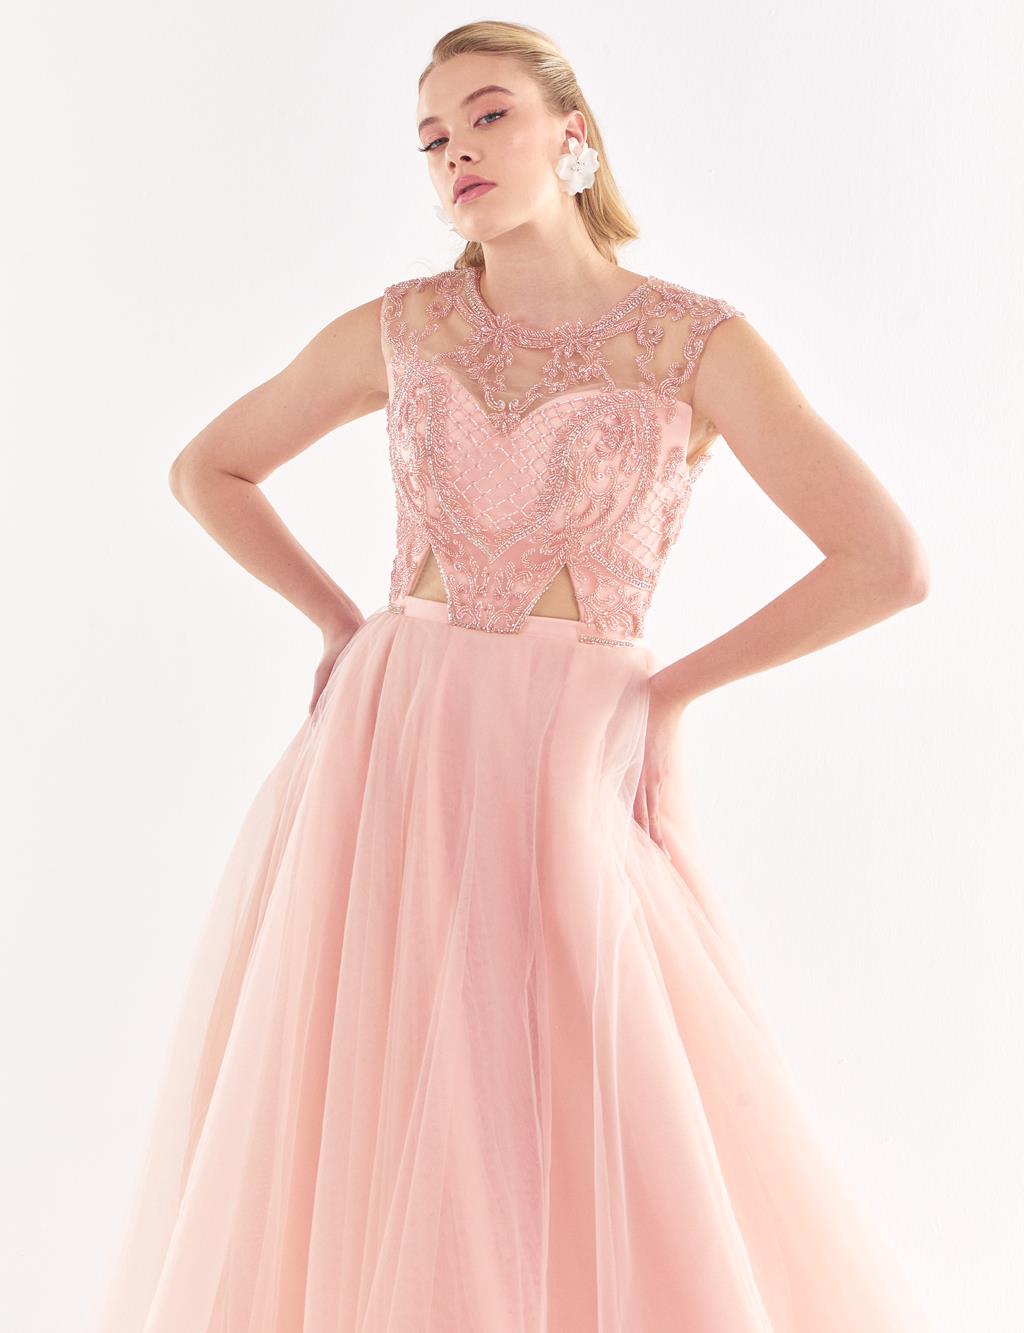 Illusion Collar Evening Dress With Tulle Skirt Powder